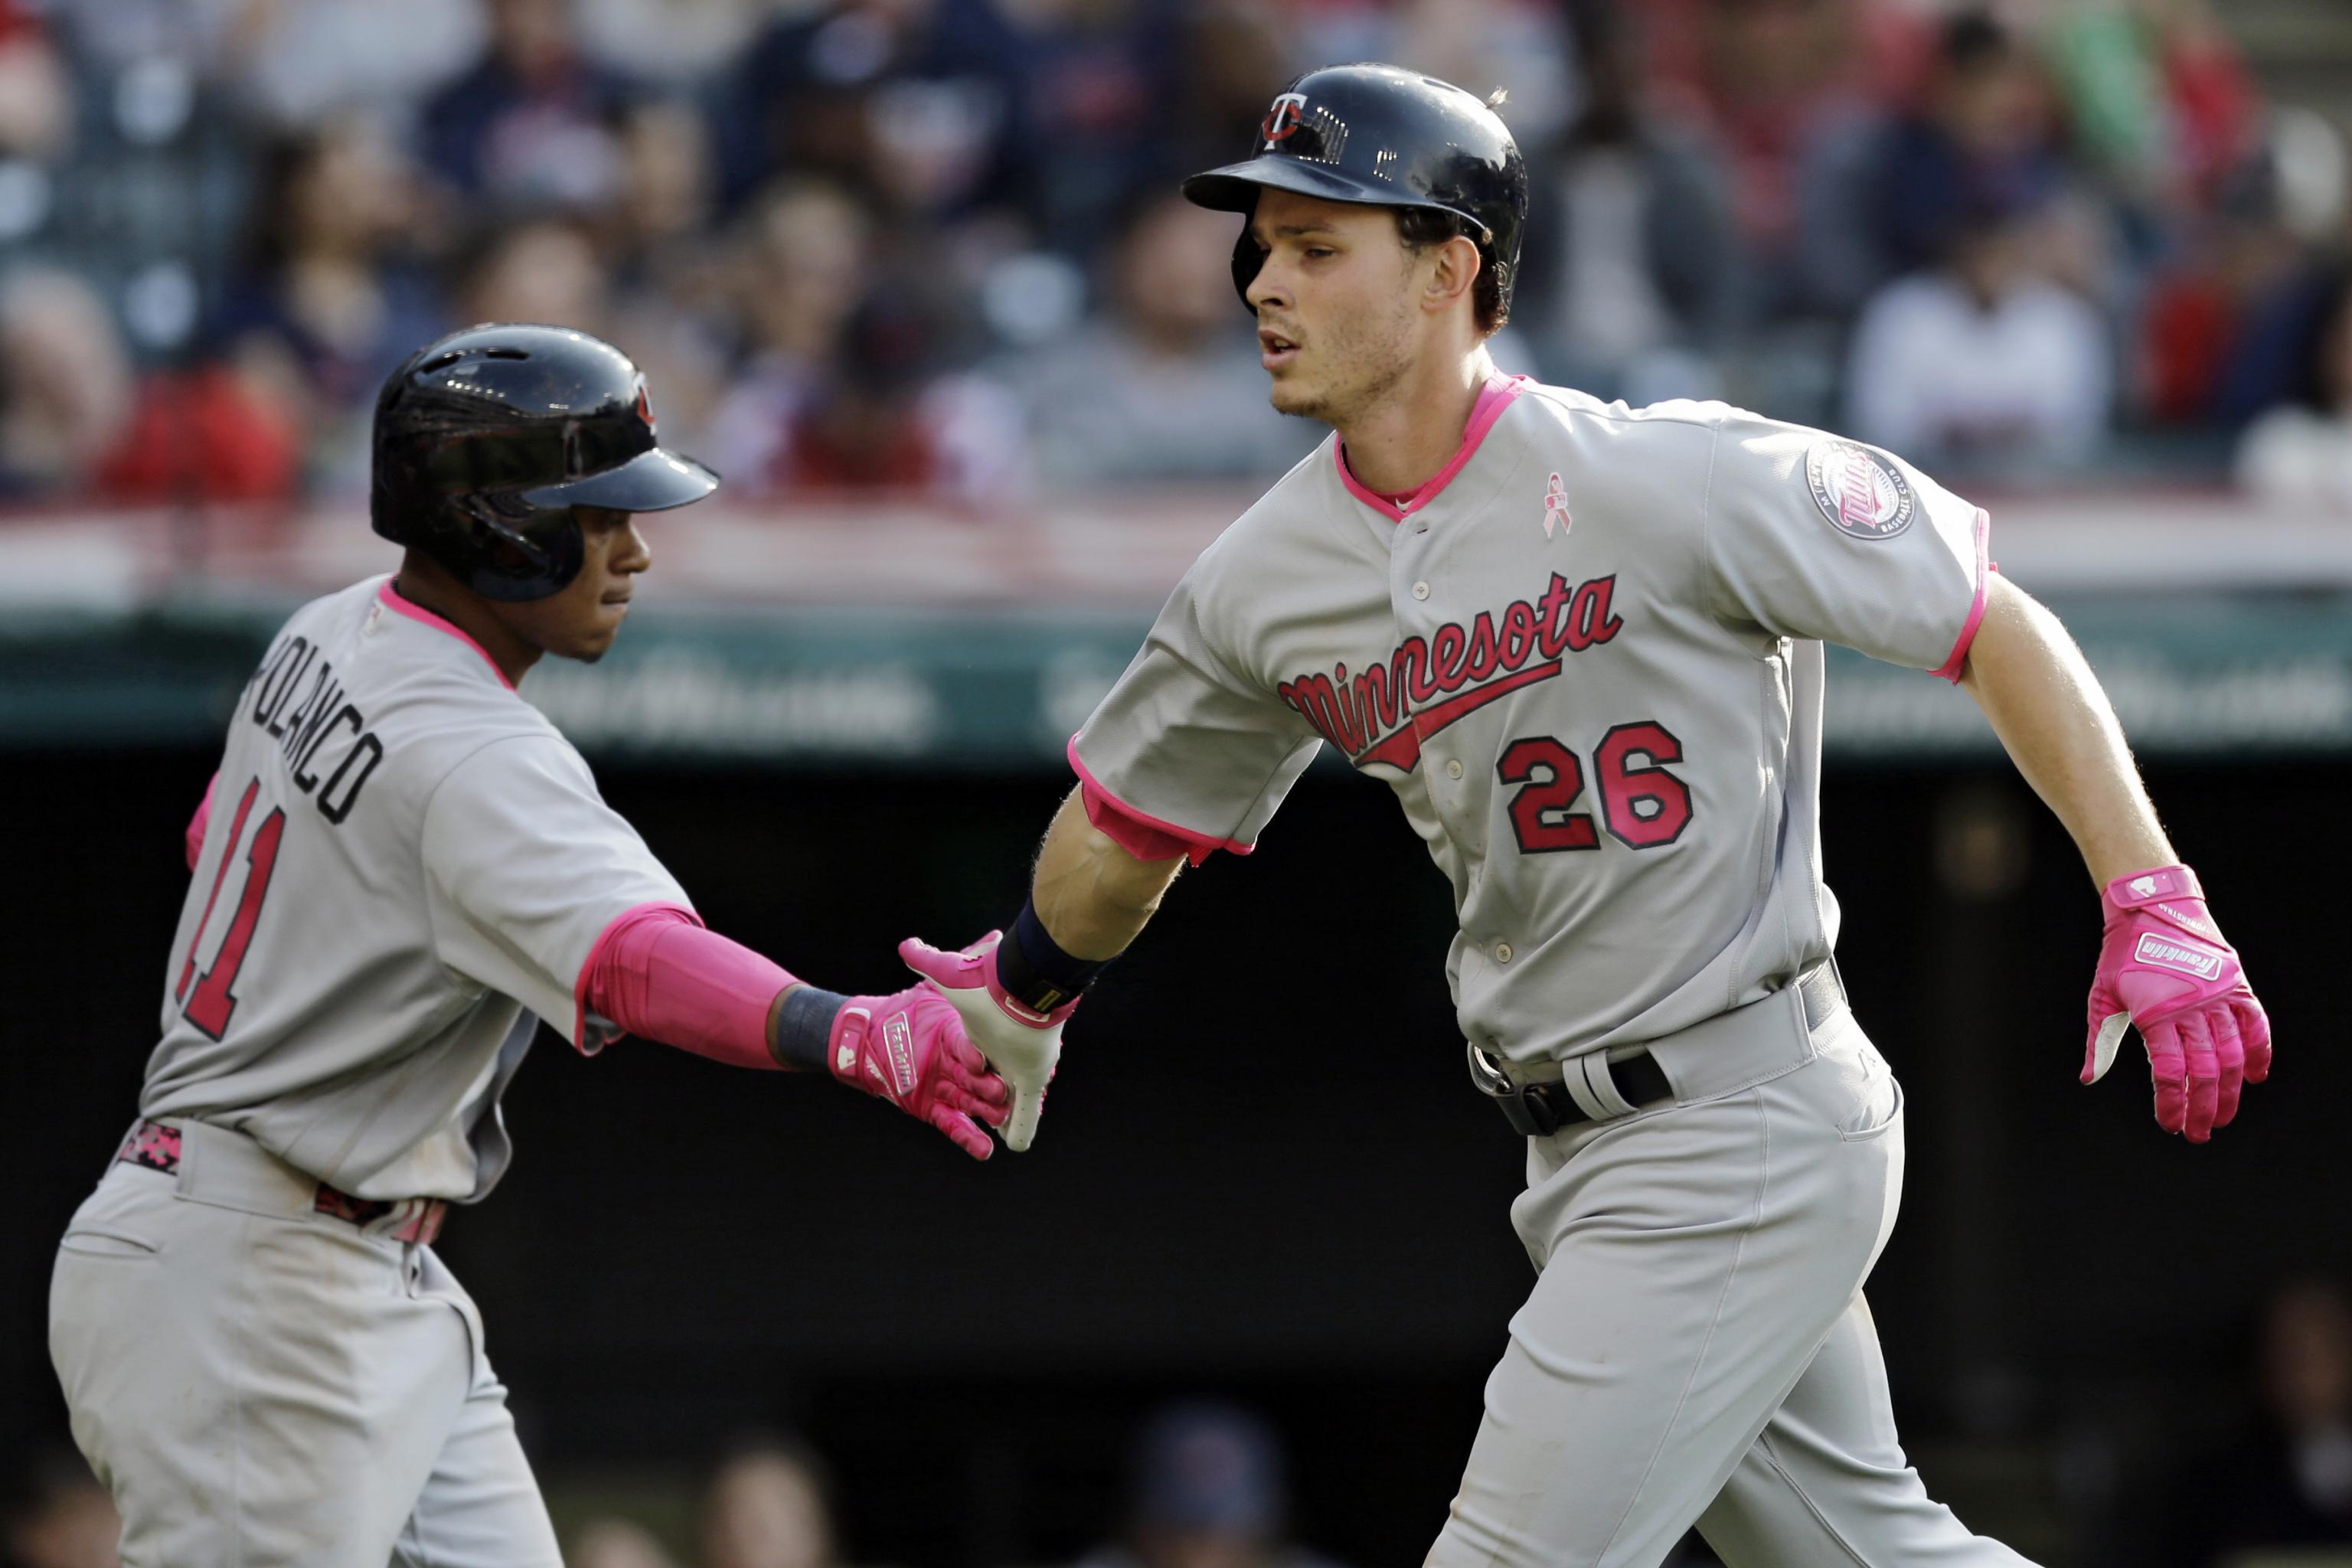 Jorge Polanco returns to second base for Twins, Max Kepler to